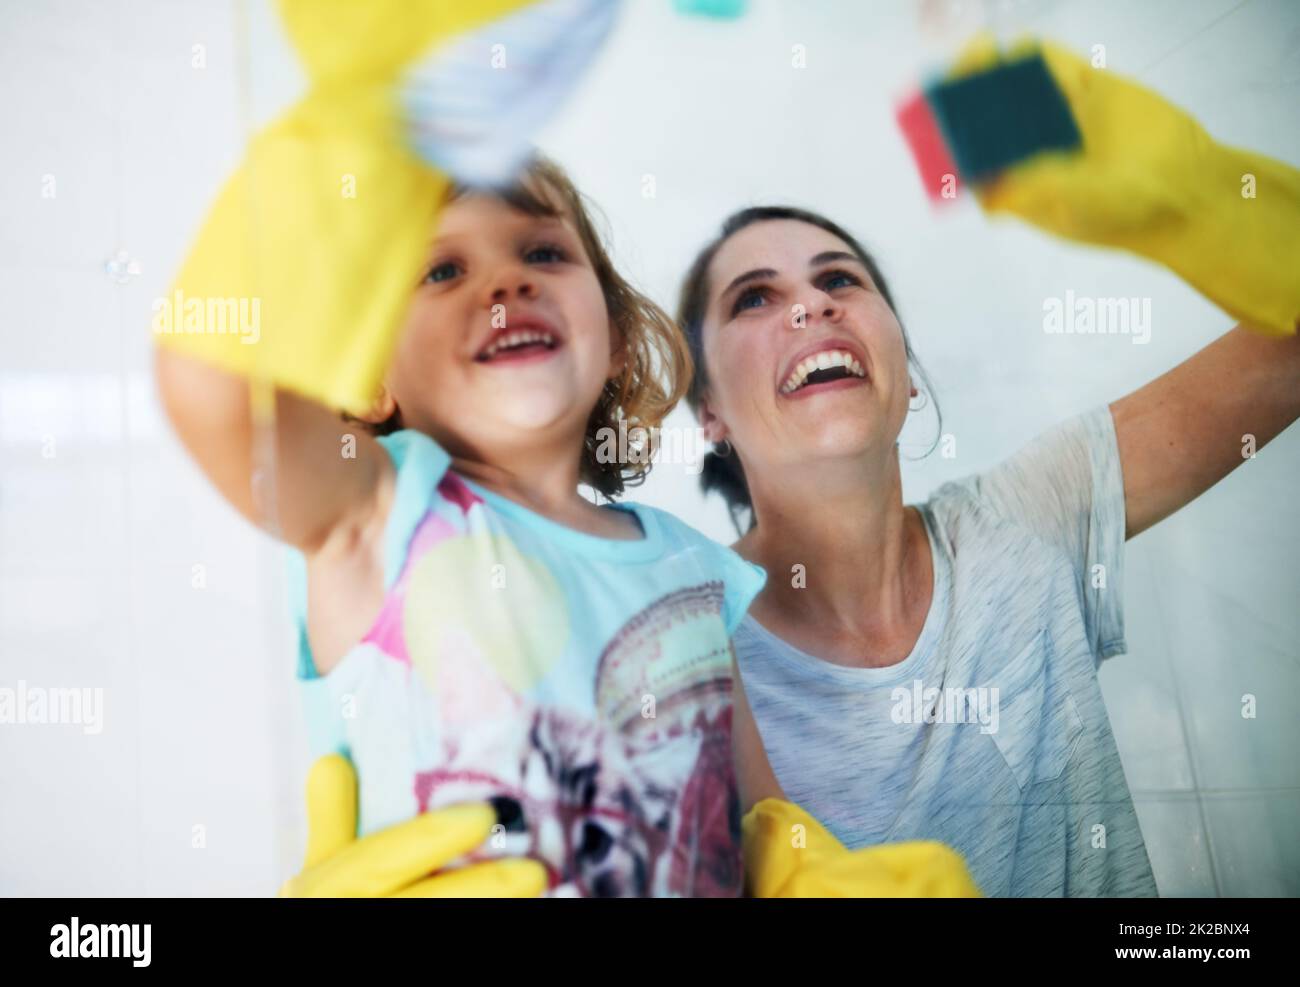 Making chores fun. Shot of a mother and daughter doing chores together at home. Stock Photo